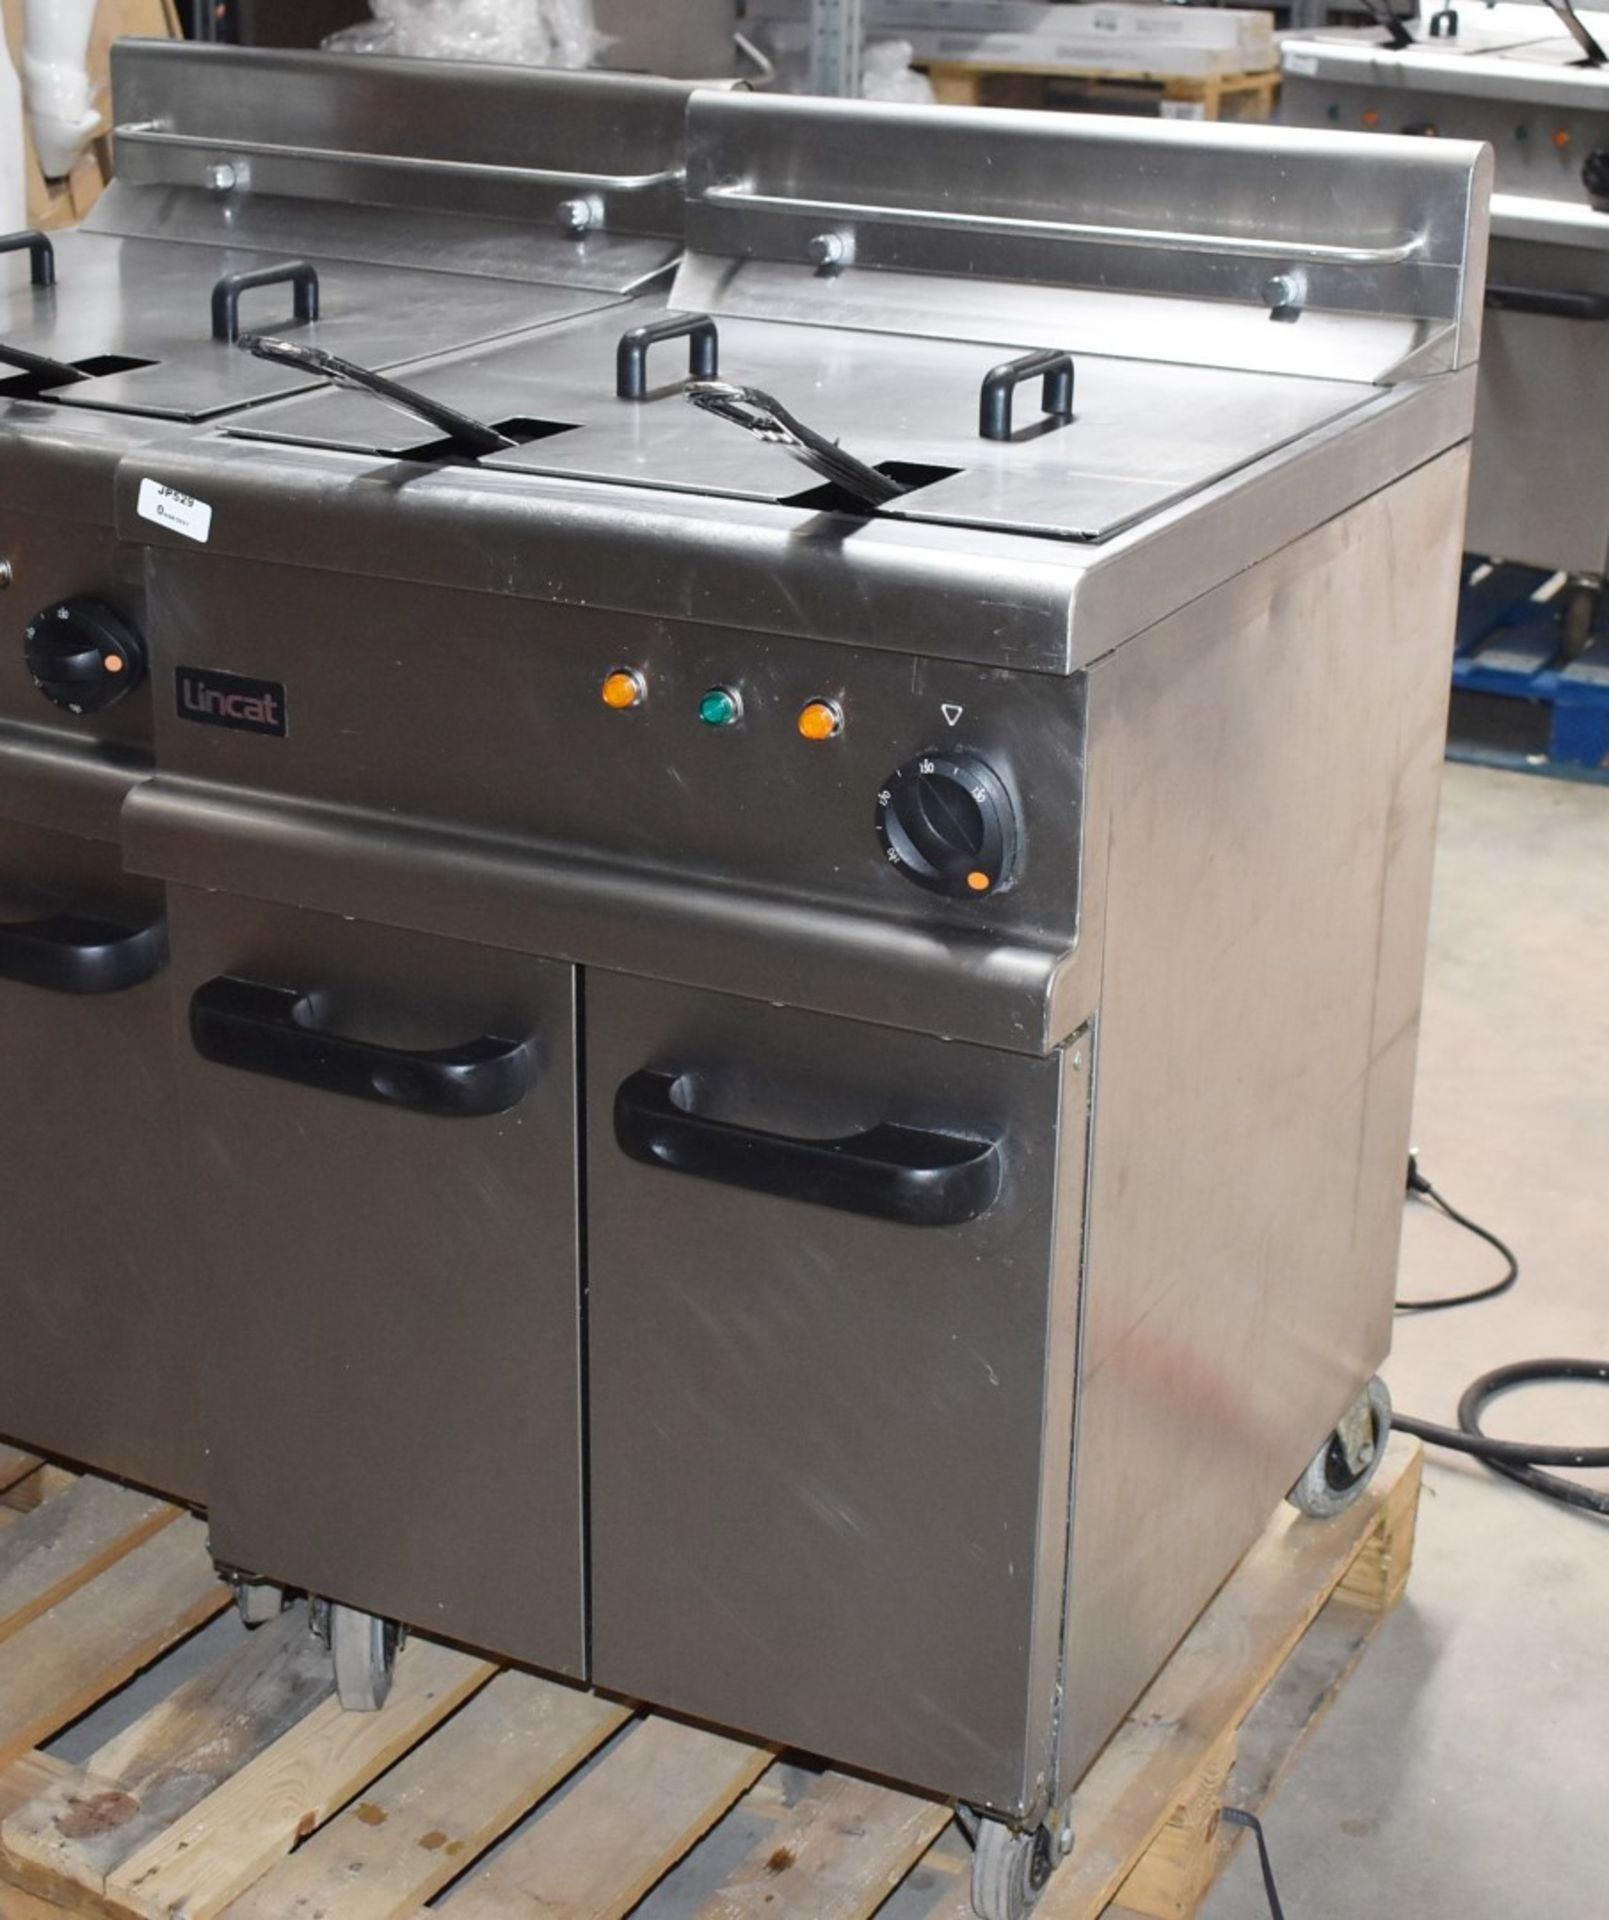 1 x Lincat Opus 700 OE7113 Single Large Tank Electric Fryer With Built In Filteration - 240V / 3PH P - Image 5 of 11